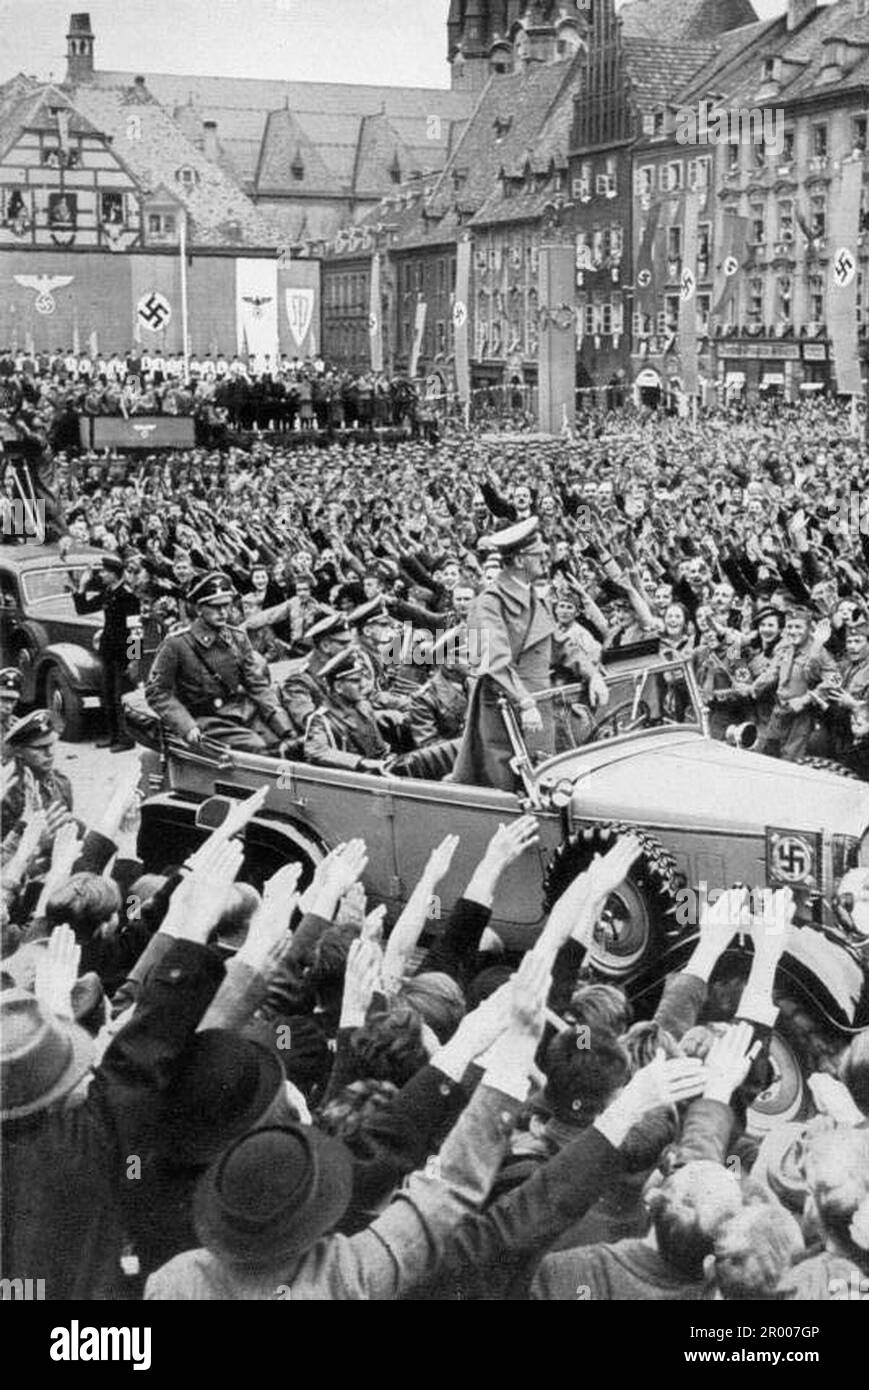 Adolf Hitler drives through the crowd in Eger/Cheb on 3 October 1938 after the annexation of the Sudetenland. After the annexation of Austria, Hitler demanded that he be given the Sudeten region of Czechoslovakia. At the Munich conference in September 1938 the Western powers agreed to this and the nazis occupied the area. Not long after Hitler broke his promise and invaded the rest of Czechoslovakia before turning his attention to Poland. Stock Photo